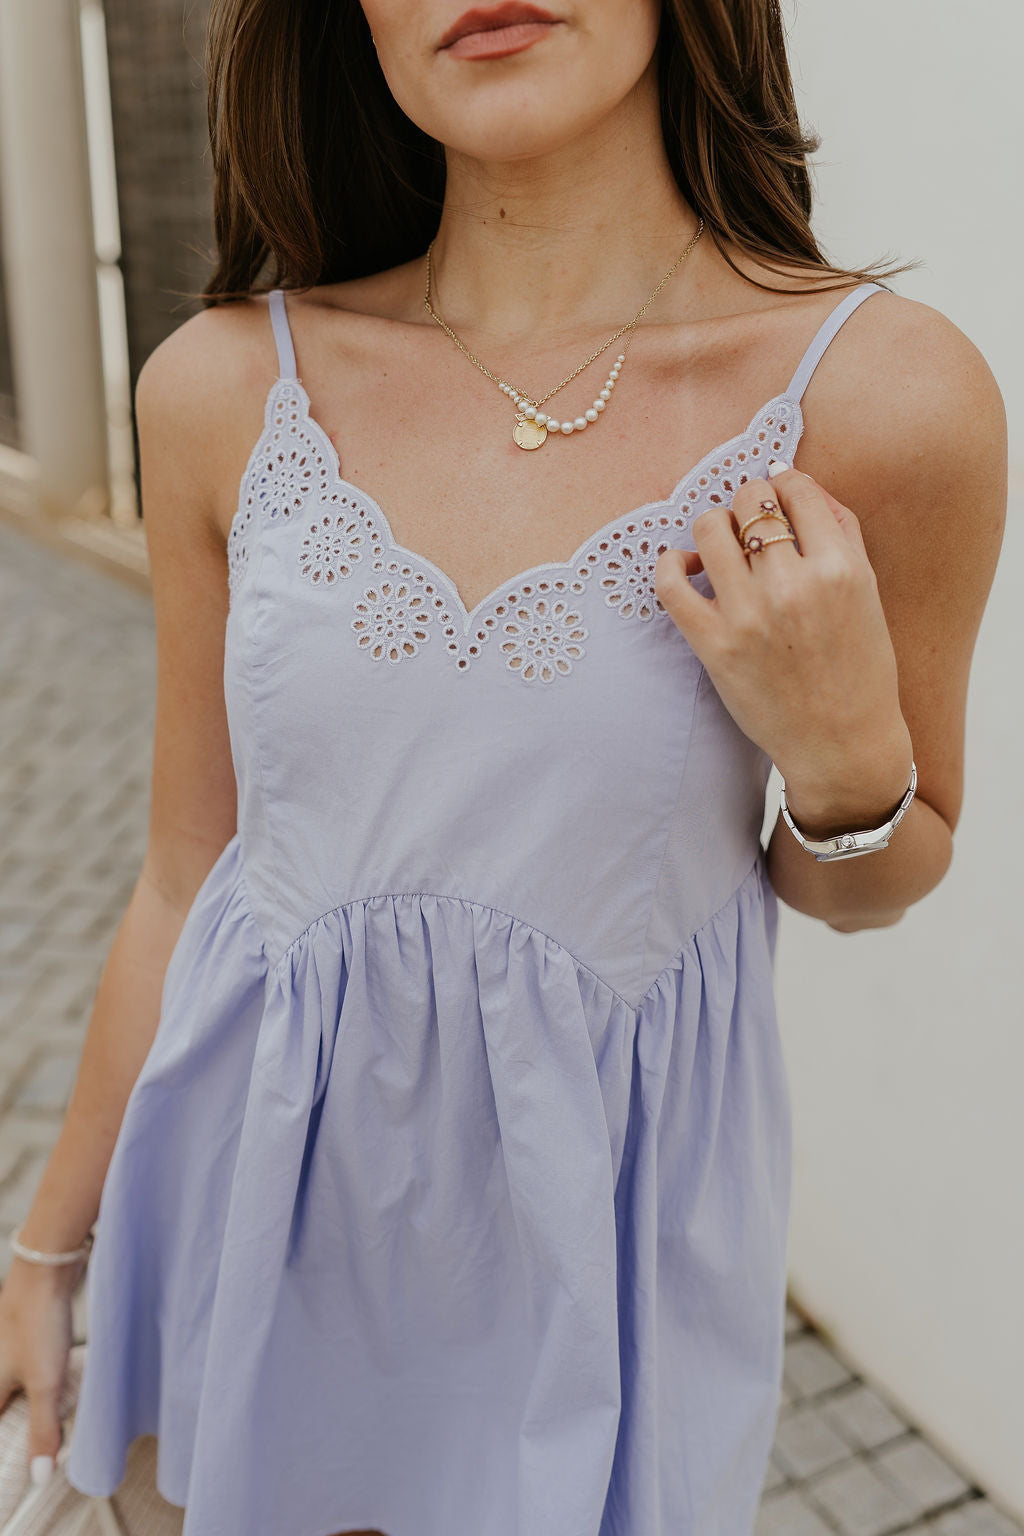 Close up view of female model wearing the Lucia Lavender Eyelet Sleeveless Mini Dress which features Lavender Lightweight Fabric, Lavender Lining, Mini Length, Eyelet Pattern, Scalloped Upper Hem and Adjustable Straps